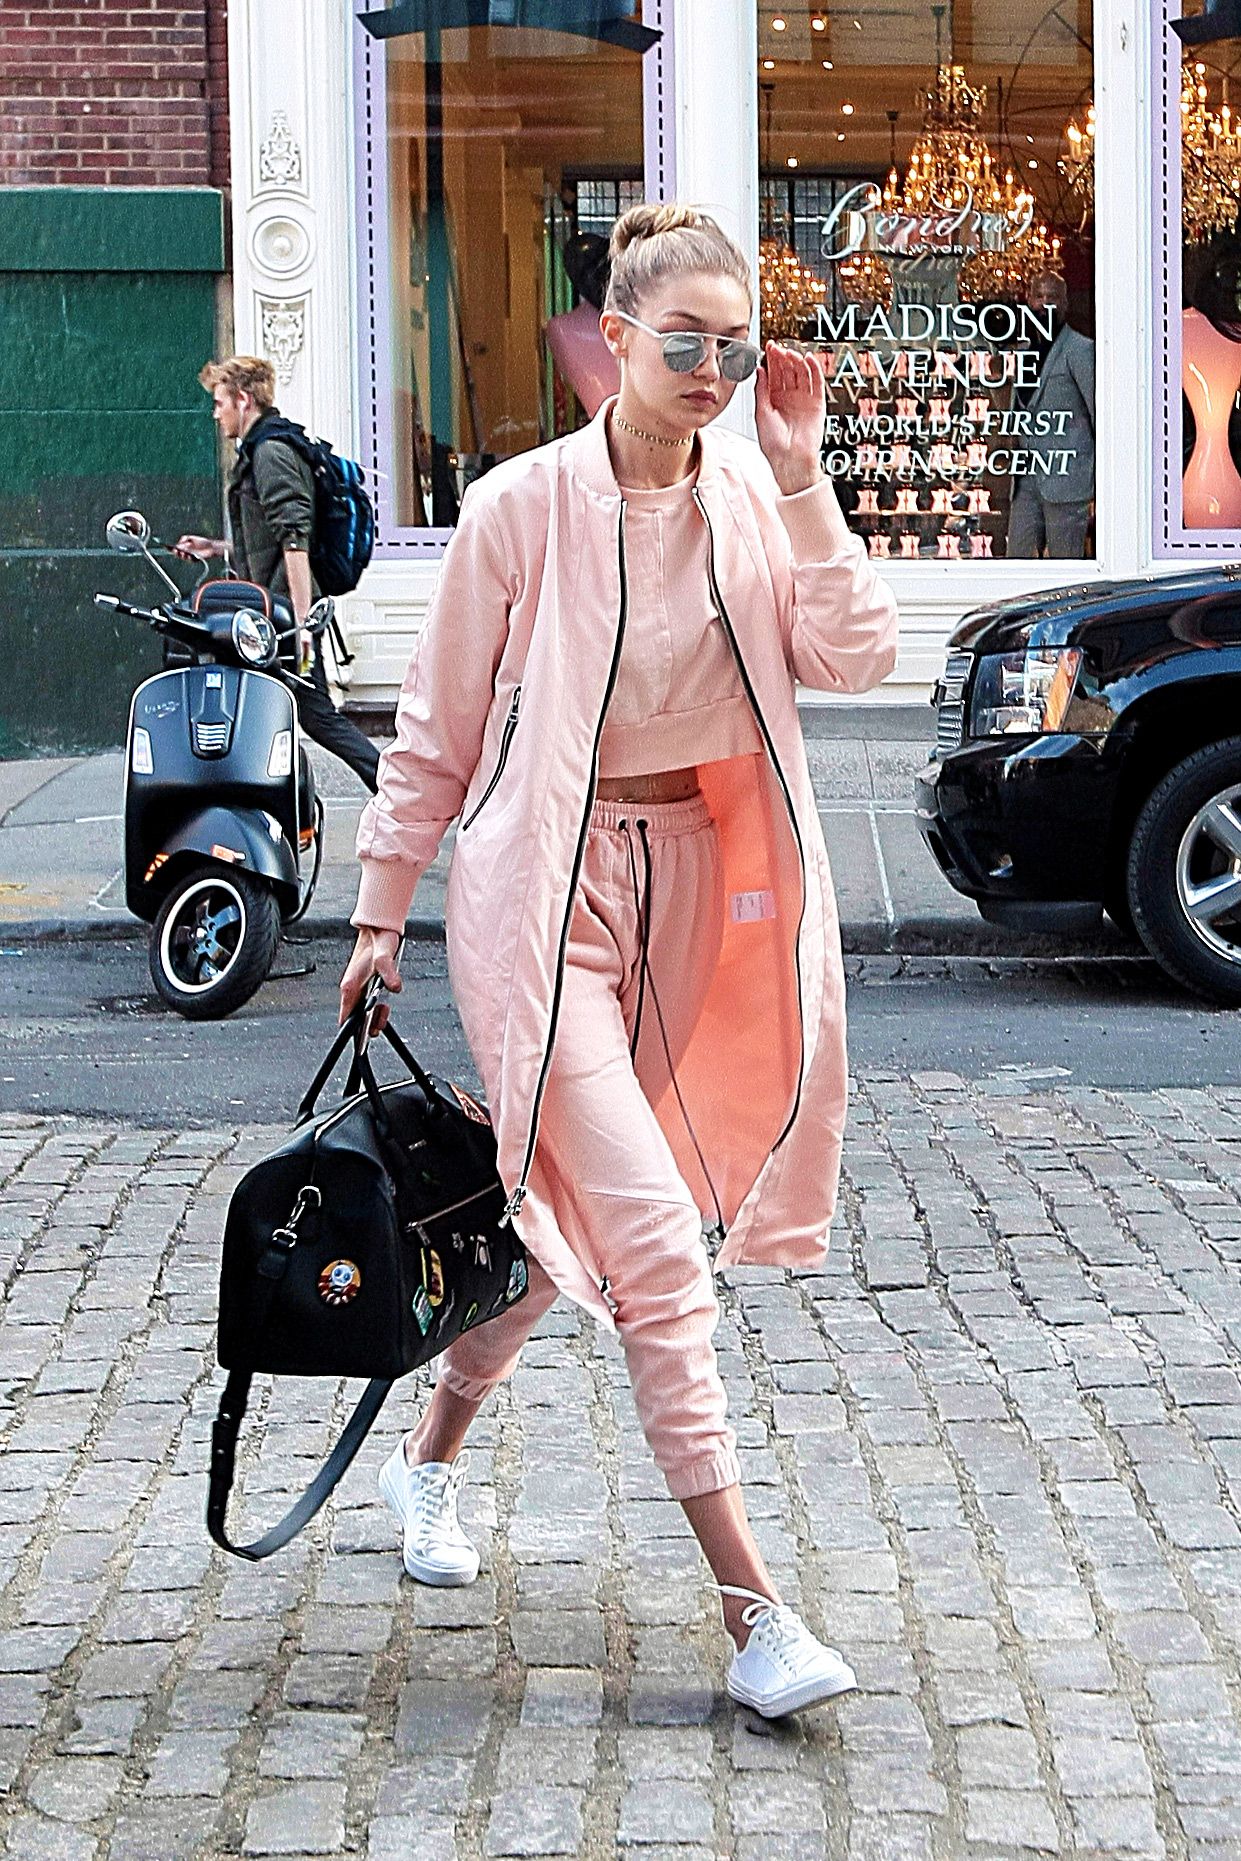 Only Gigi Hadid Could Look This Stunning in Head-to-Toe Sweats